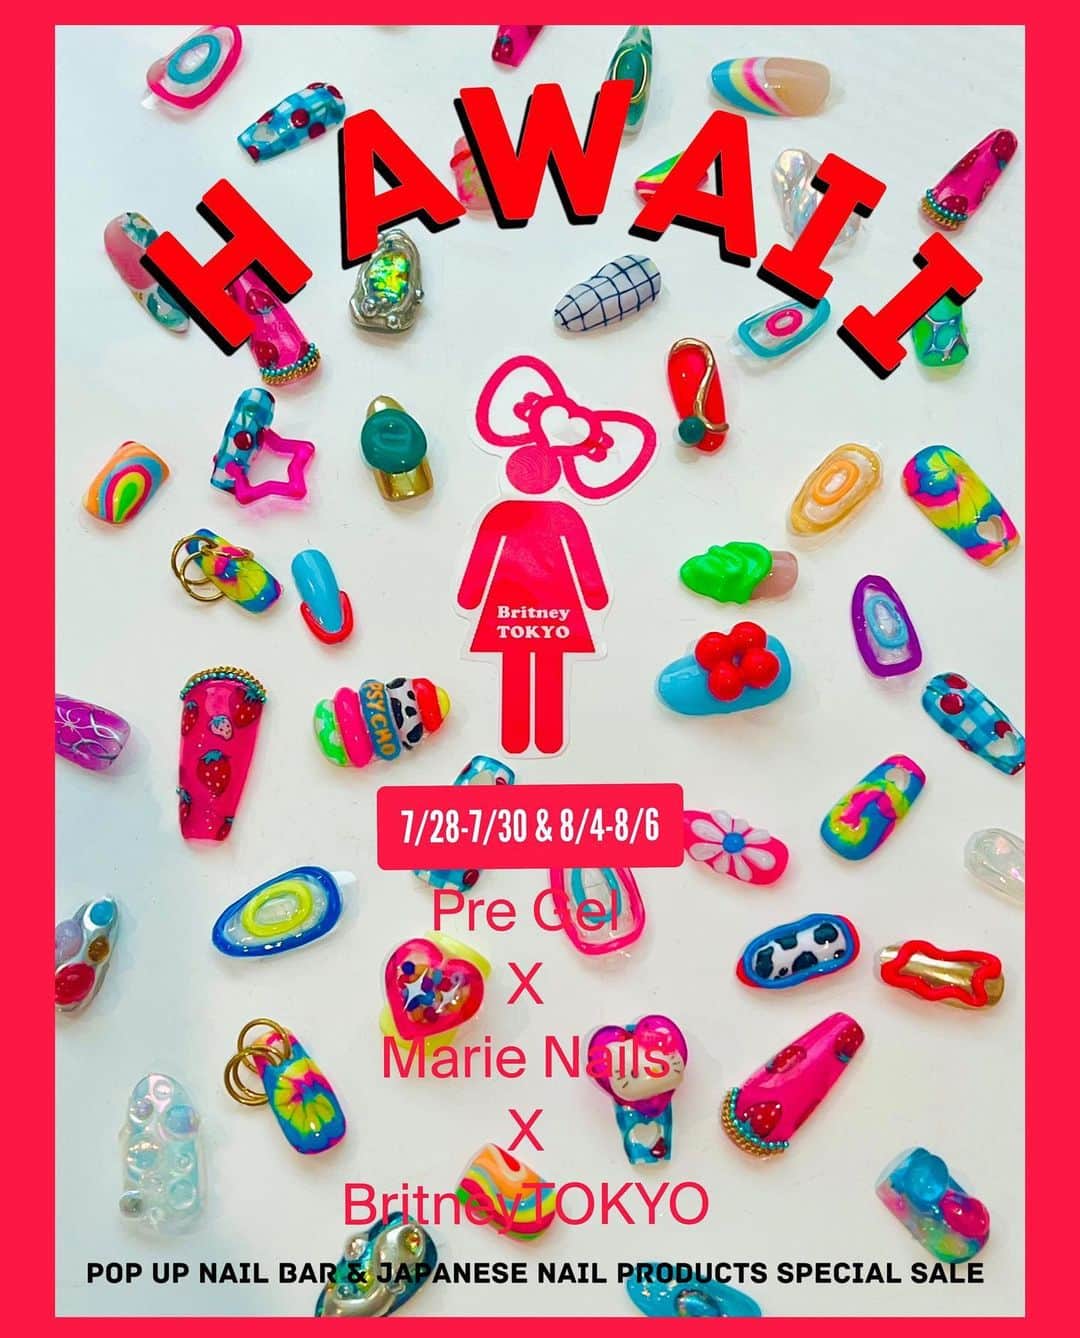 Britney TOKYOのインスタグラム：「Hawaii 7/28-7/30 & 8/4-8/6💅🏼🌺  I'm going to do a pop up nail art bar for the first time in a while! I’ll use Japanese #1 nail brand @pregel.jp products this time!Please DM me for your nail appointments🫶  And we have another good news! Pre gel will begin full-scale sales in the United States. Please follow @pregelusa ⬅️💖 We will sell pregel at a special price at the pop-up event in Hawaii 7/26-7/30,8/4-8/6 . feel free to stop by @marienails_hawaii  第2の故郷ハワイでネイル💅🏼予約受付します💖🌺空き状況とか予約詳細はDMしてね🎵今回は @pregelusa アメリカ🇺🇸祝進出を記念してスペシャルプライスでジェル販売もするみたい👍ハワイのネイリストさん是非say hisしにきてね🧸💕」